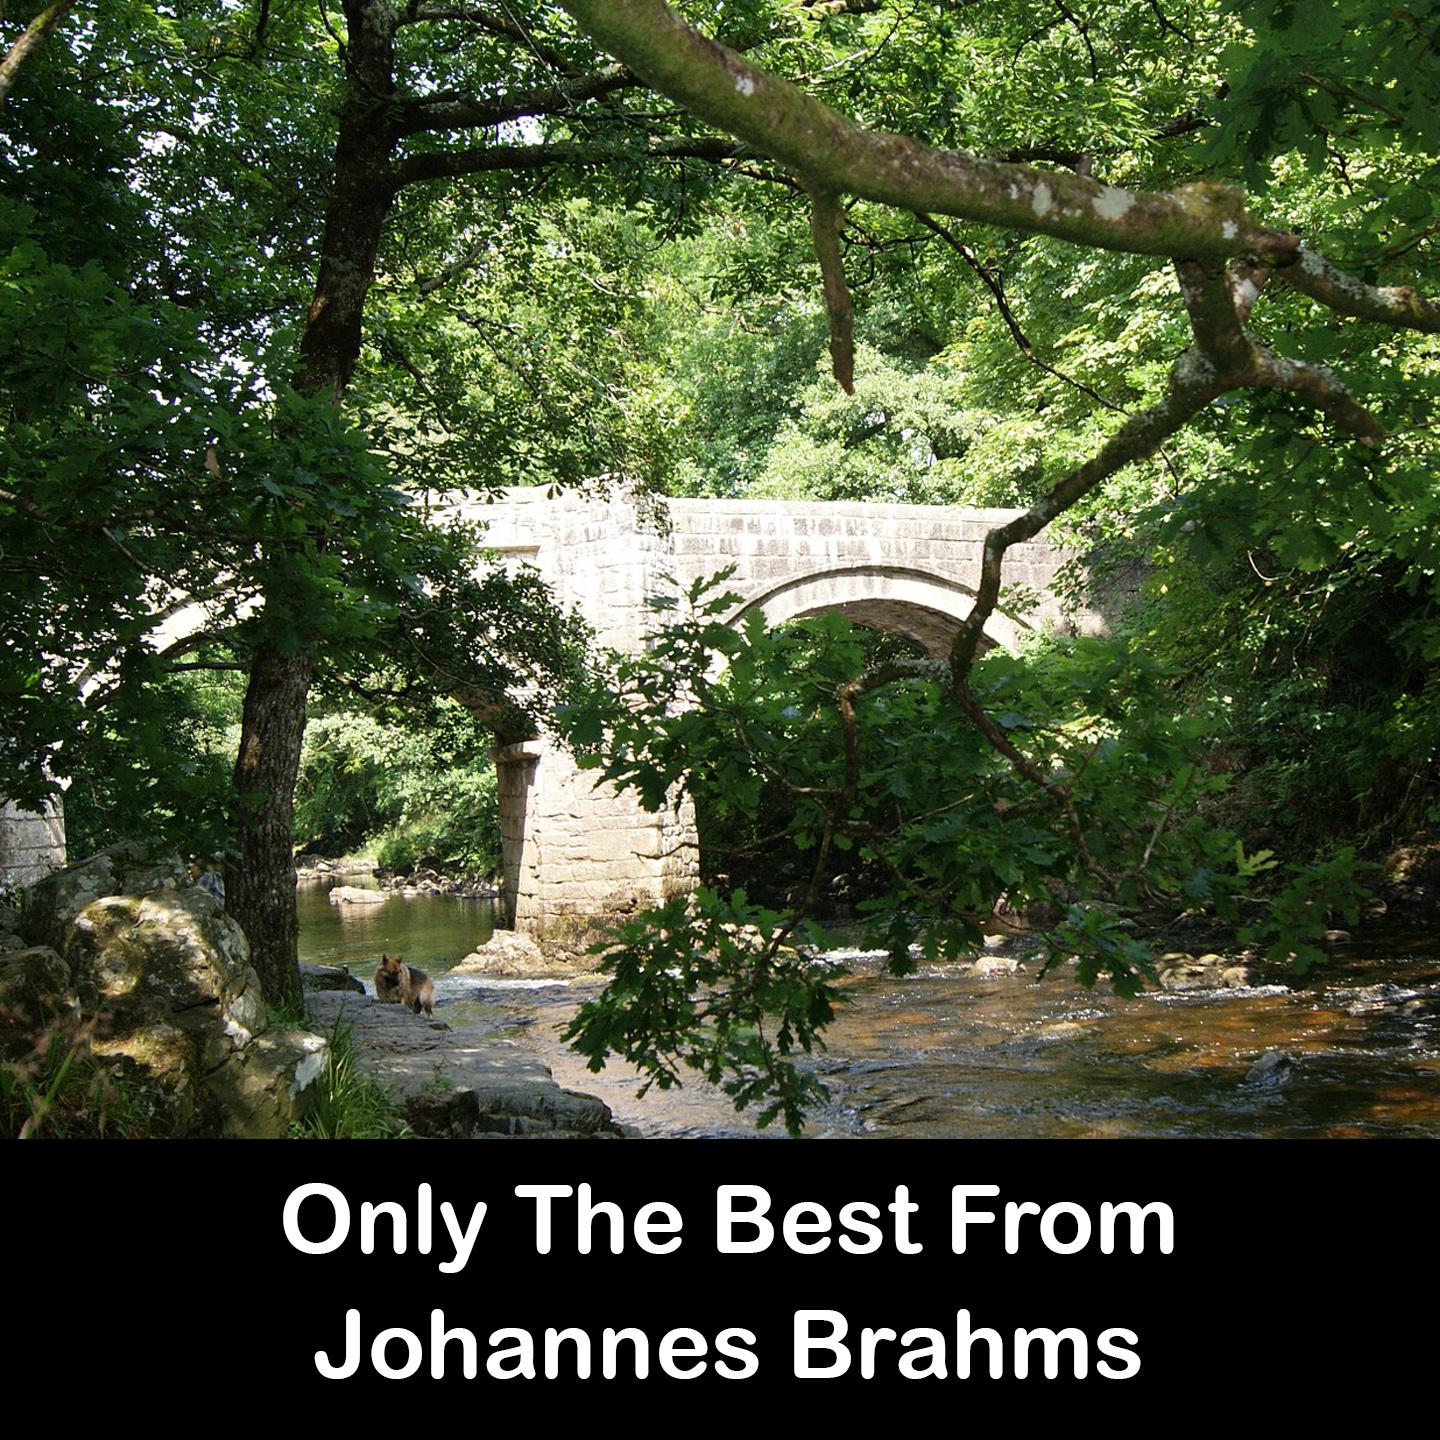 Only The Best From Johannes Brahms